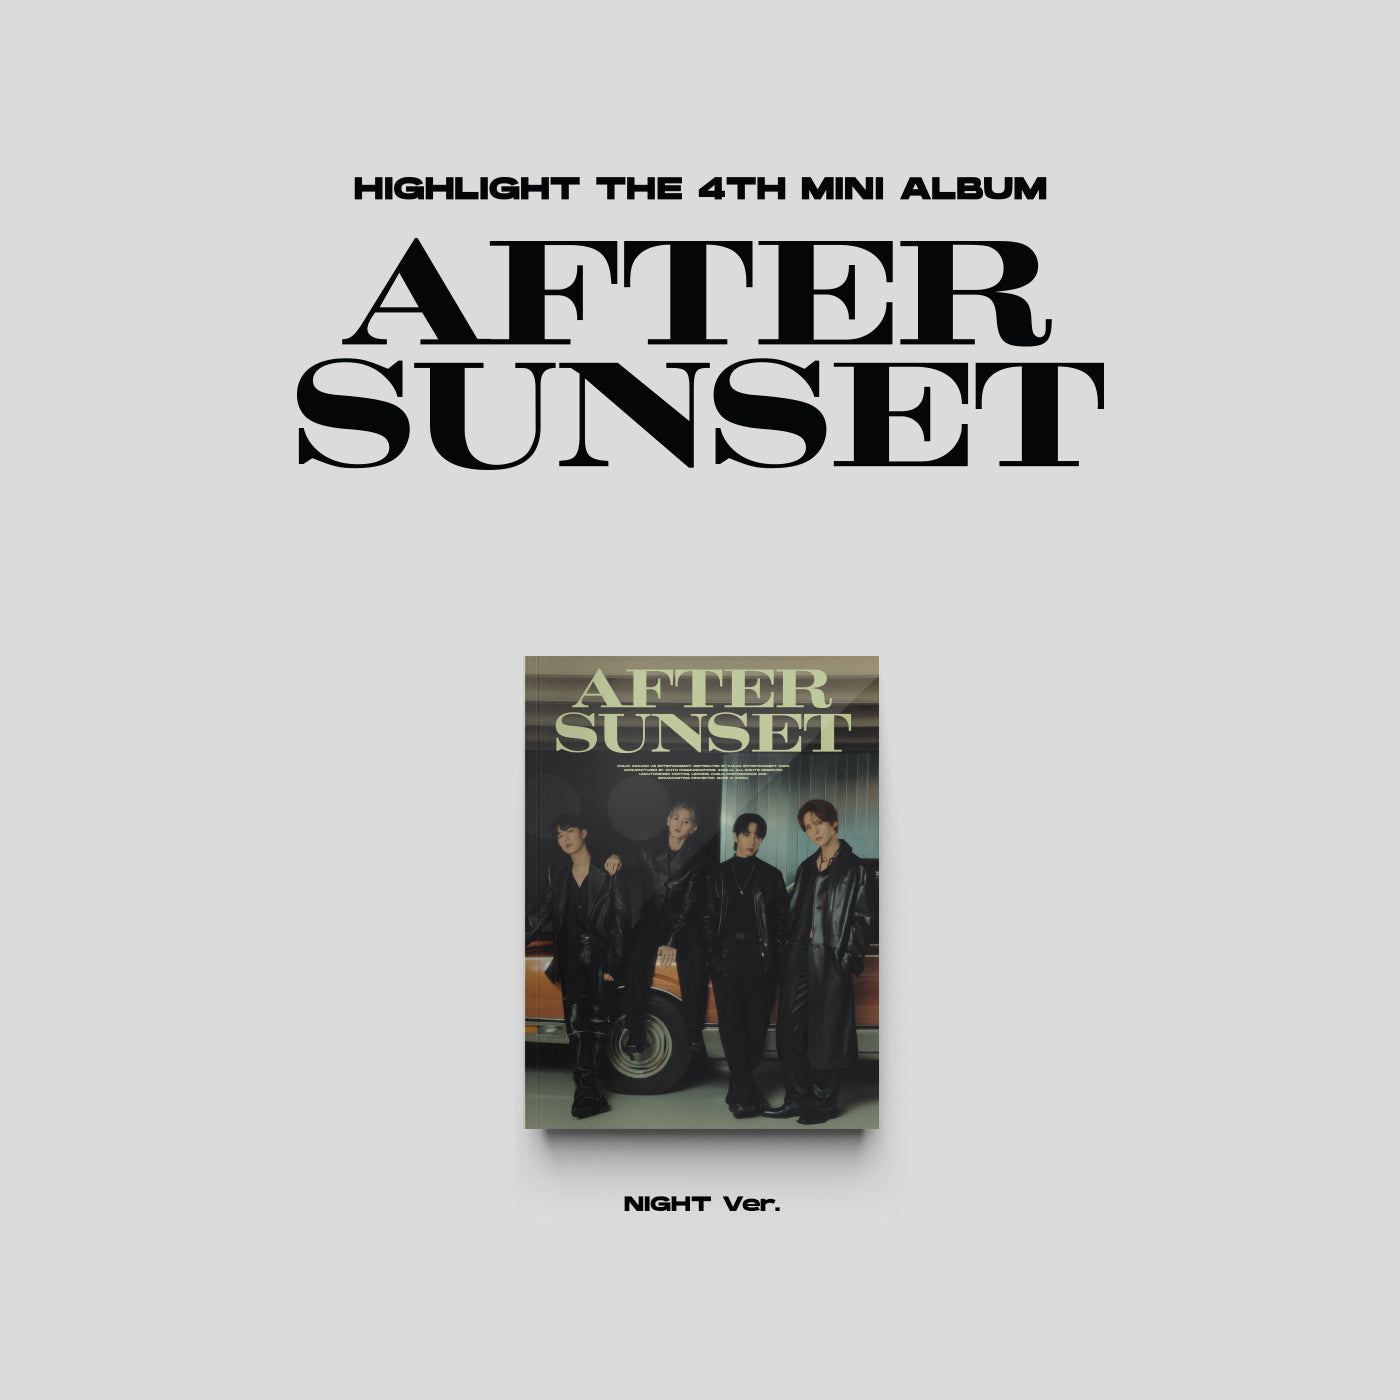 HIGHLIGHT 4TH MINI ALBUM 'AFTER SUNSET' NIGHT VERSION COVER